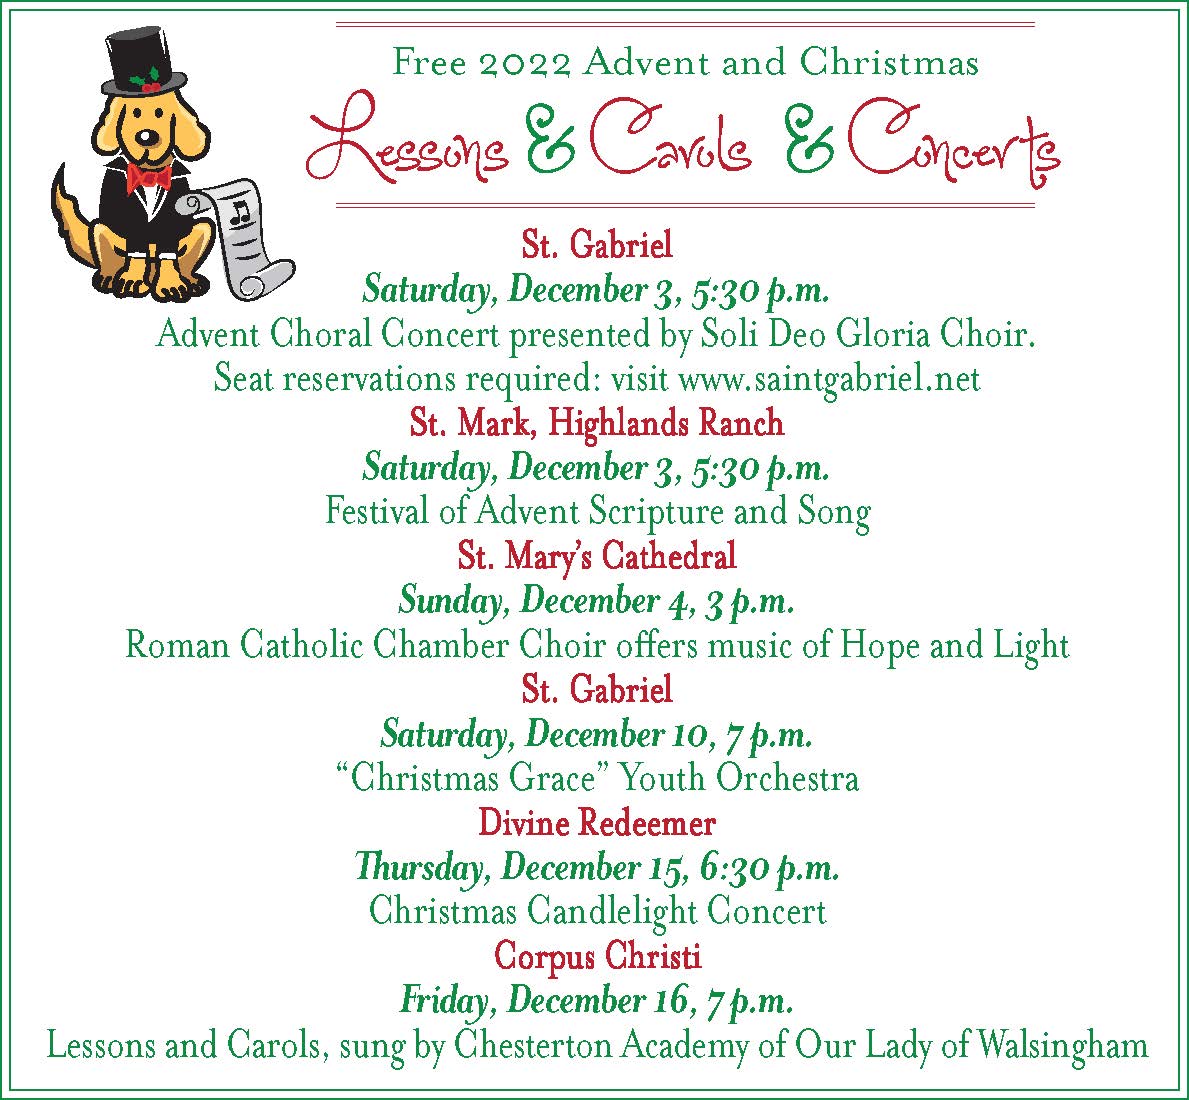 Lessons and Carols and Concerts